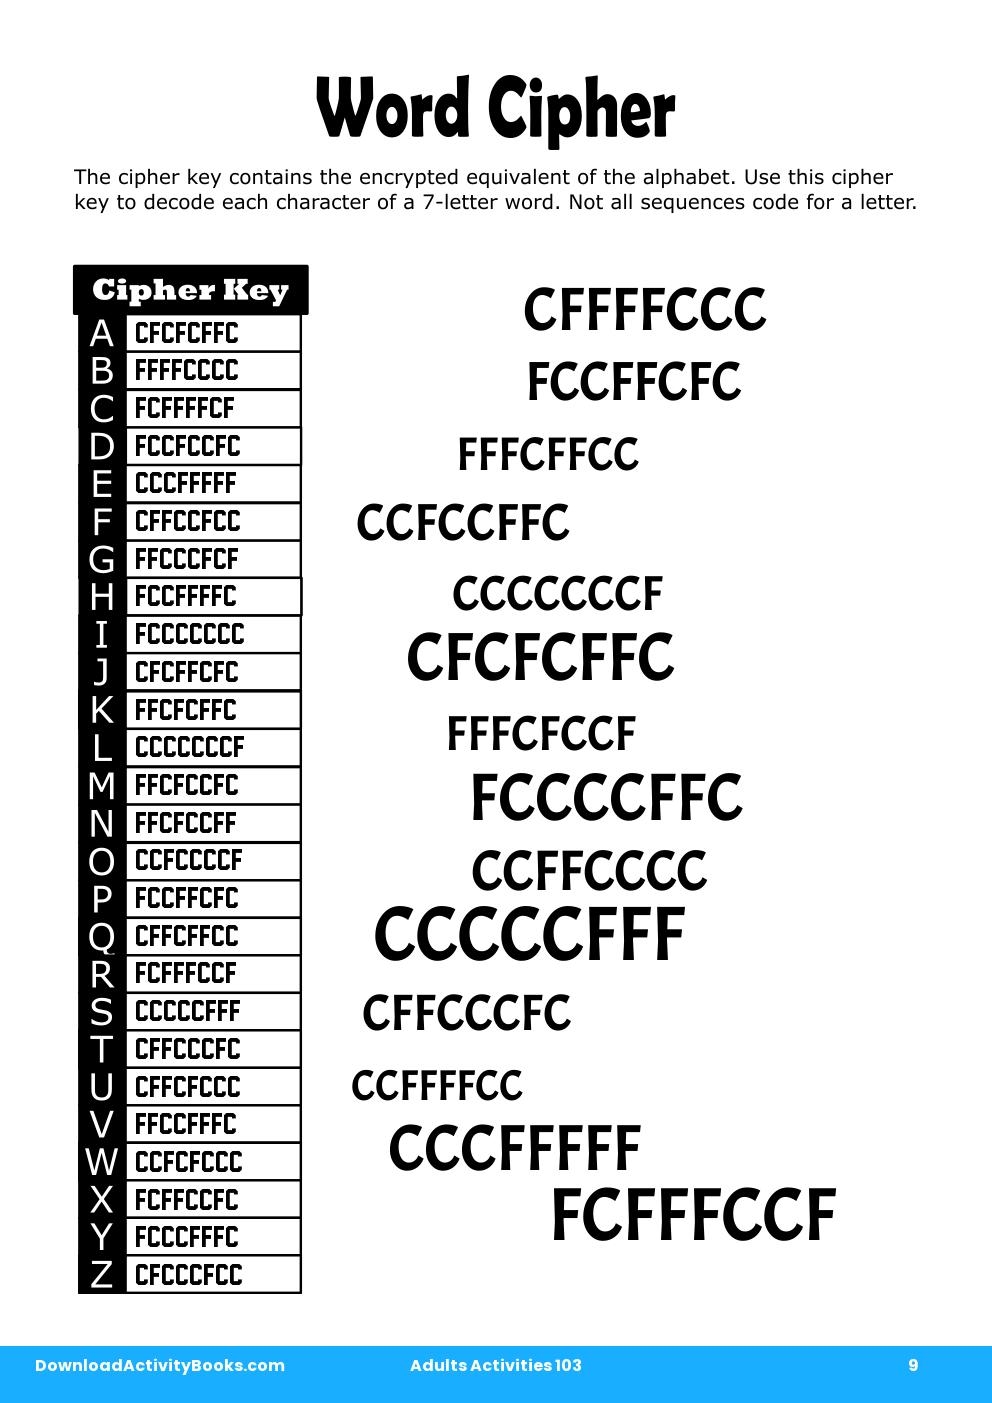 Word Cipher in Adults Activities 103